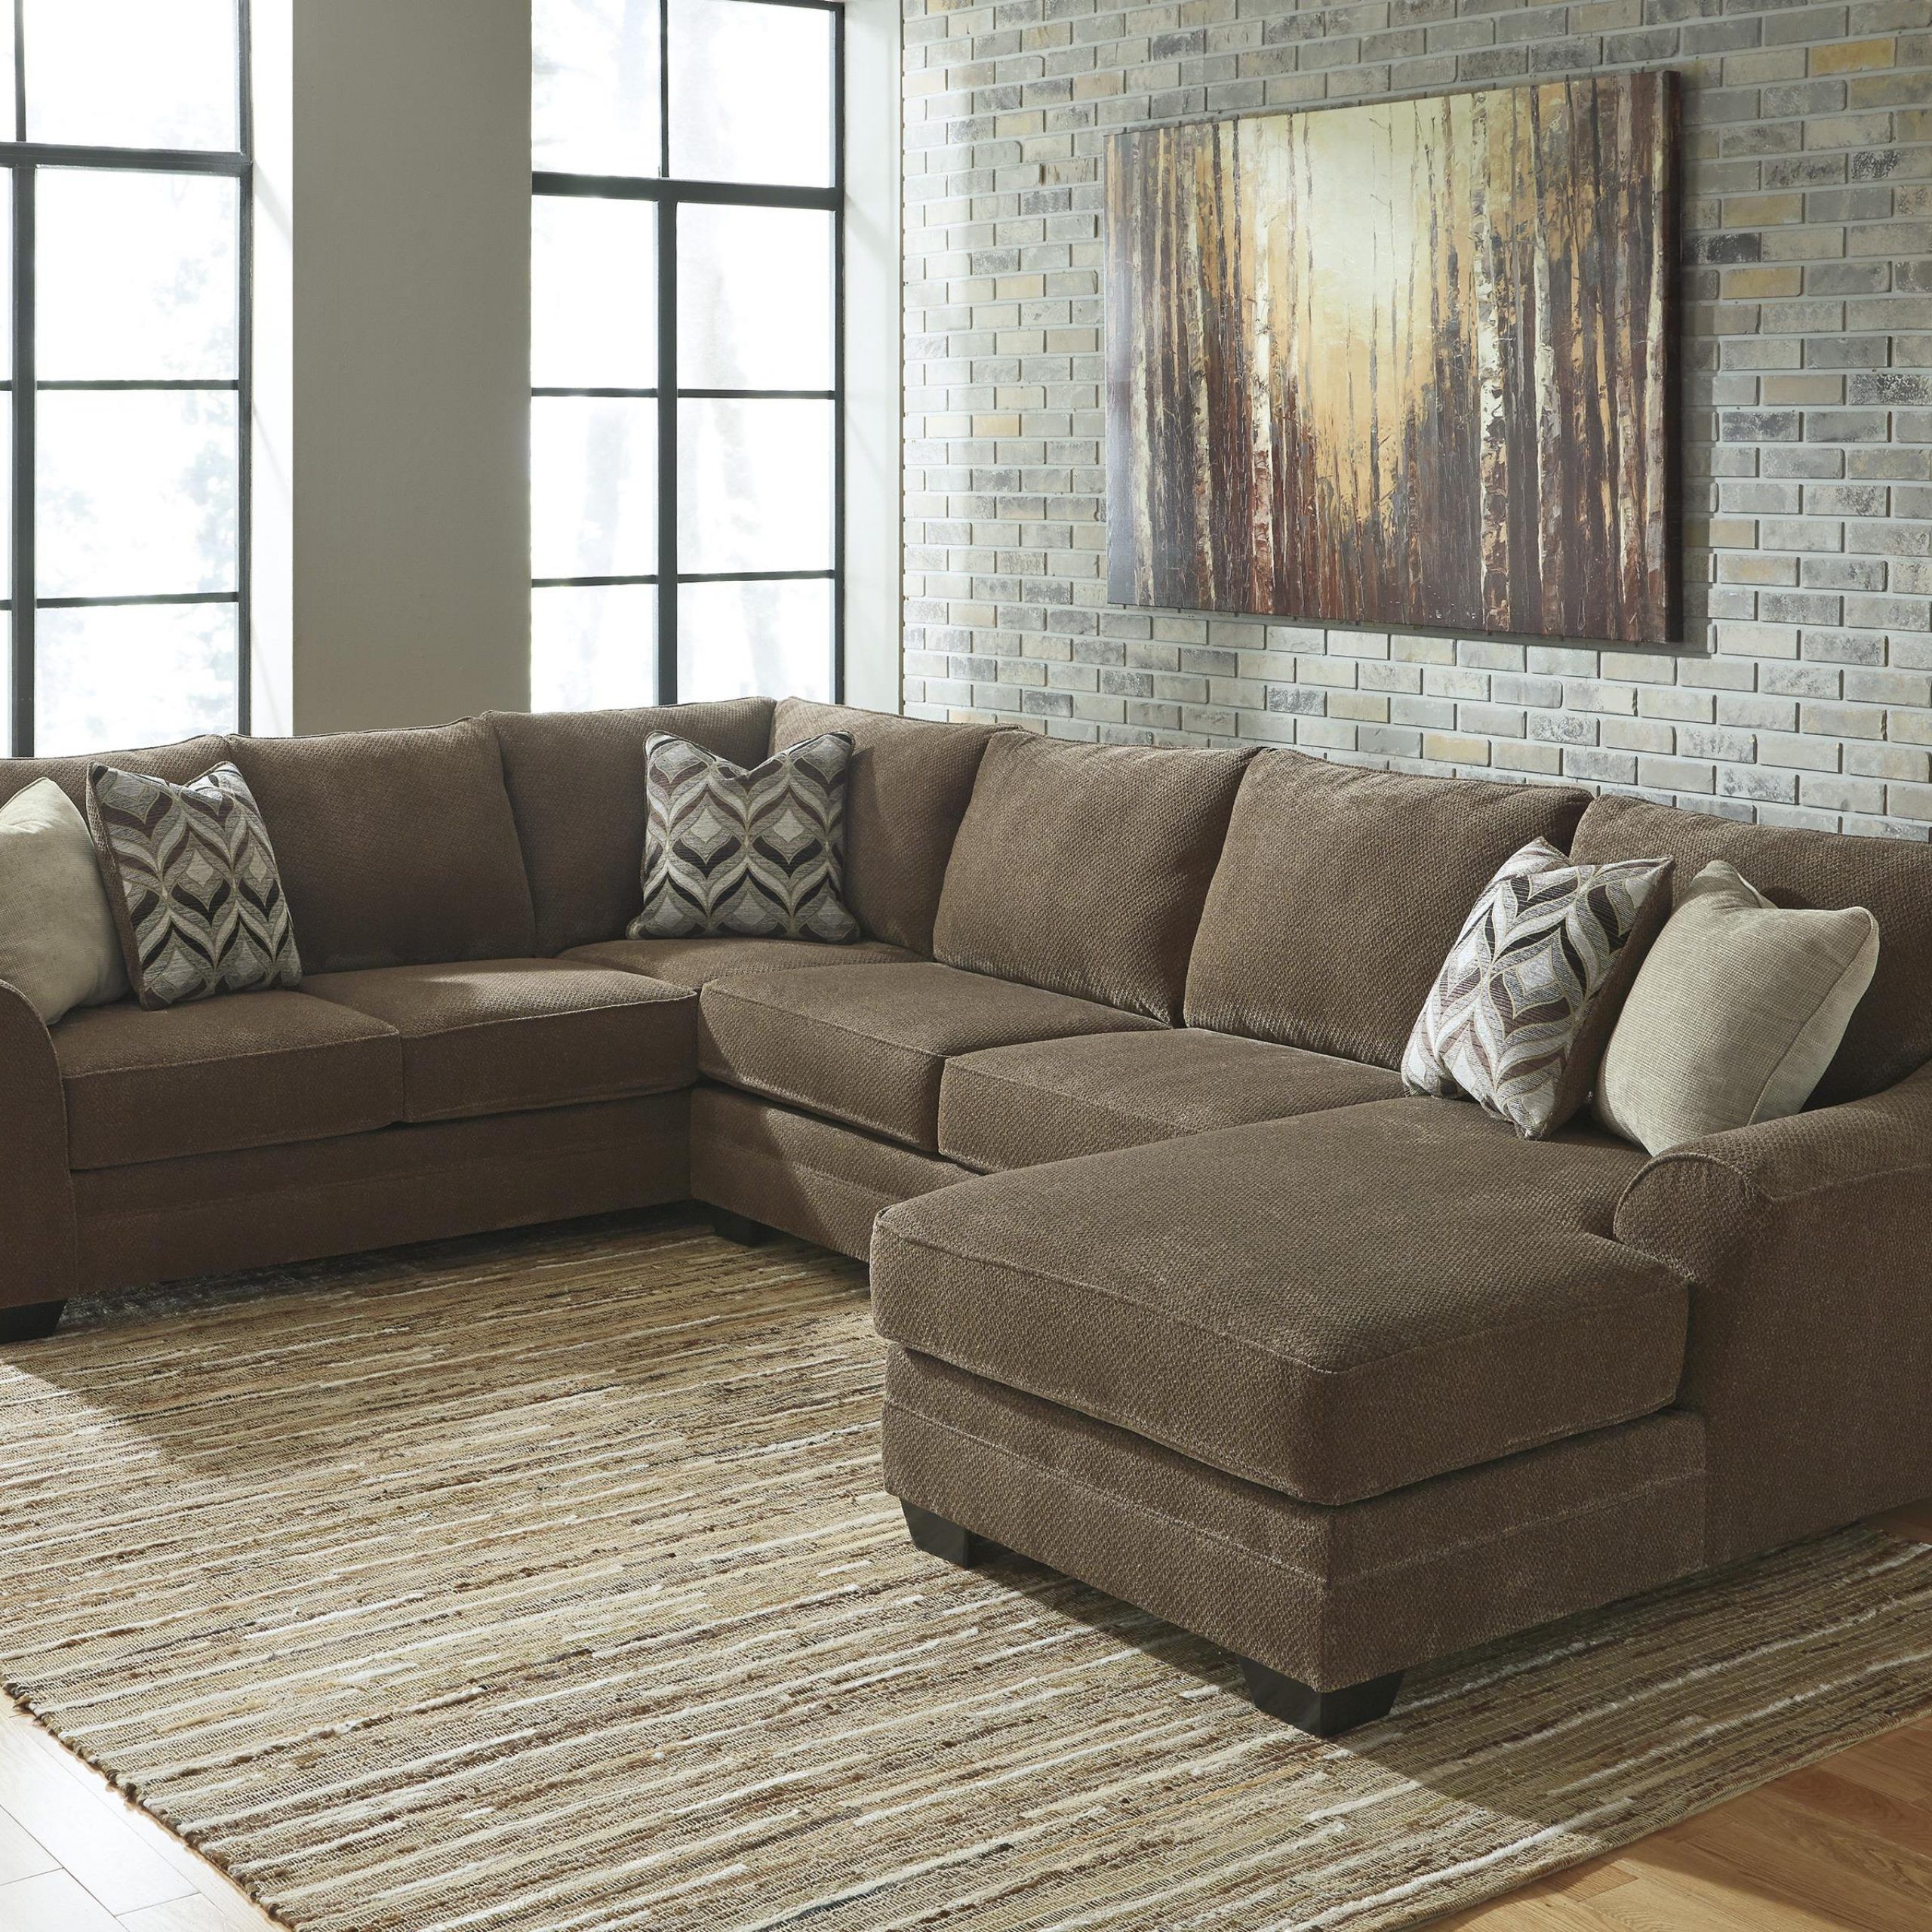 Benchcraft Justyna Contemporary 3 Piece Sectional With With 3pc Polyfiber Sectional Sofas (View 3 of 15)